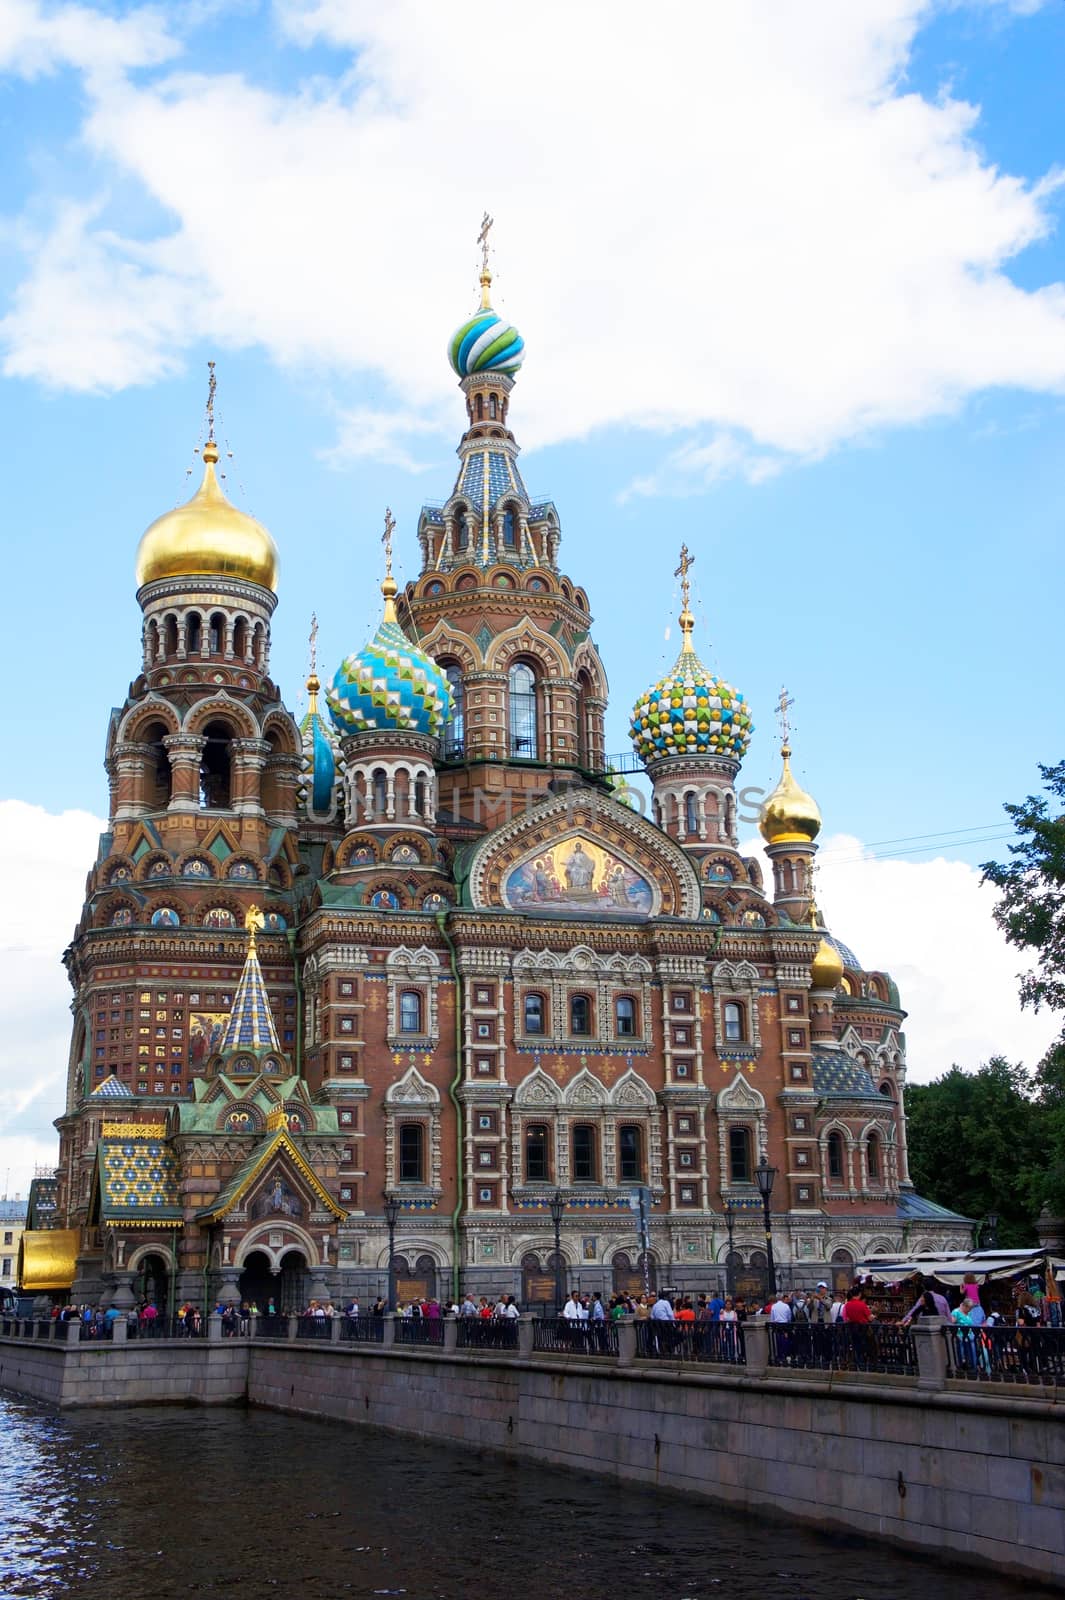 St. Petersburg Church of the Spilled Blood in Russia by Suchan